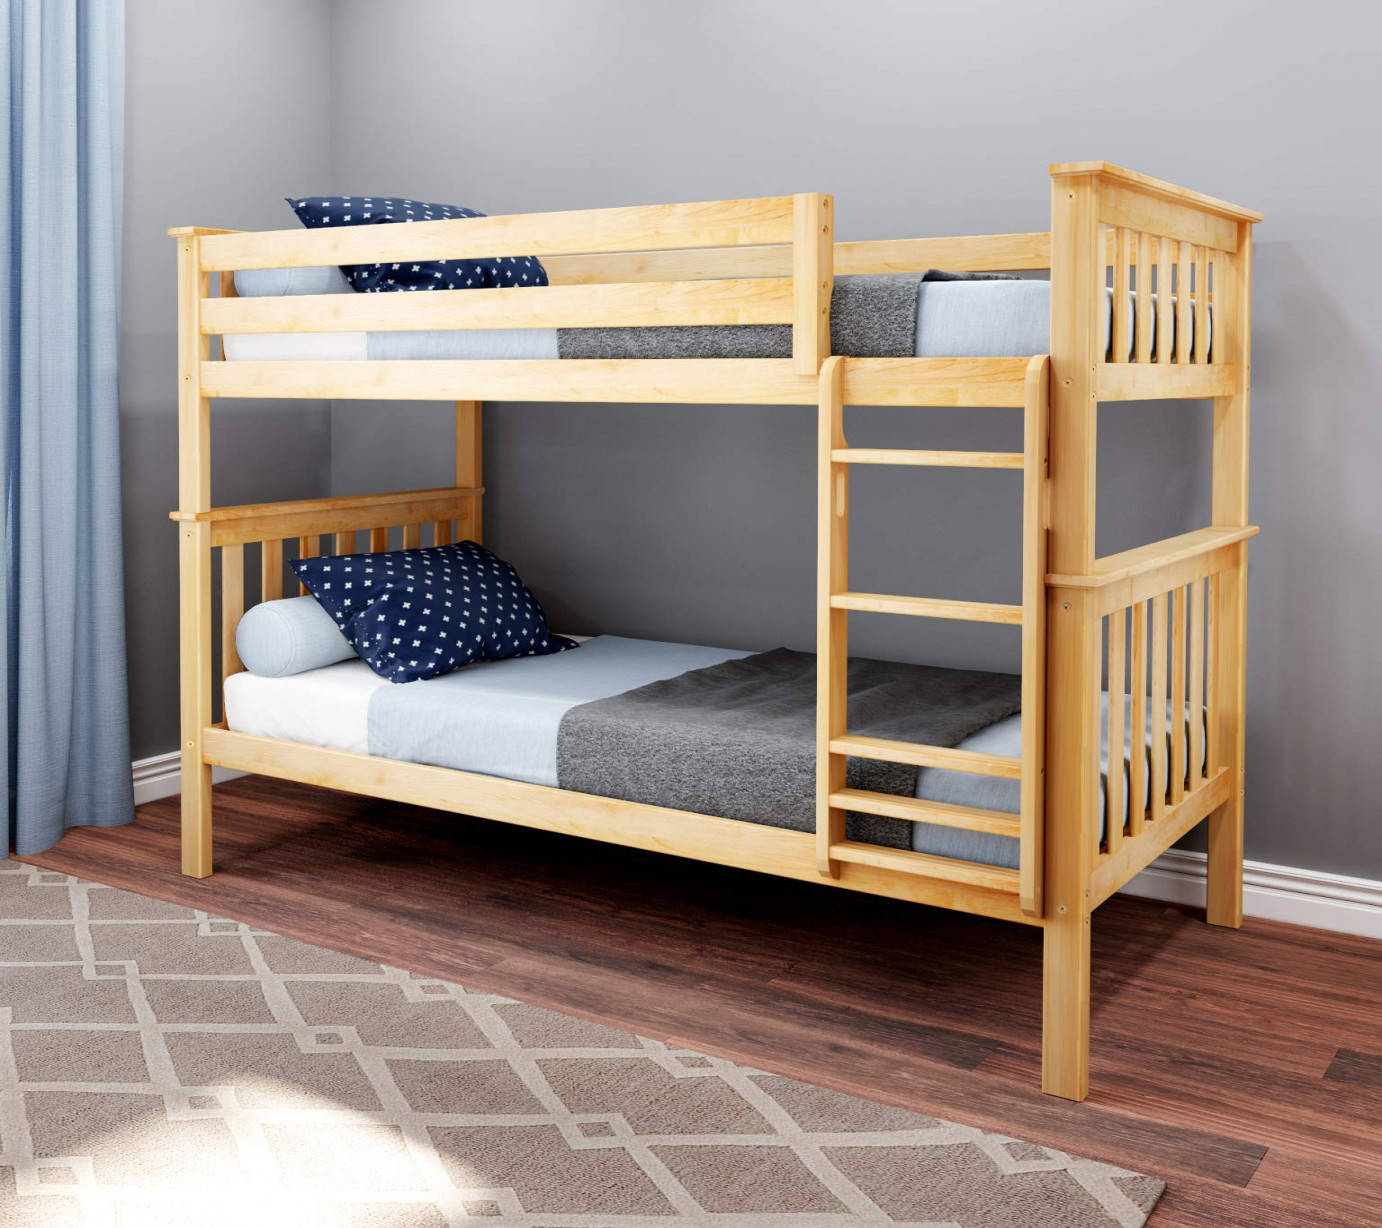 Max & Lily Bunk Bed, Twin-Over-Twin Wood Bed Frame For Kids, Natural